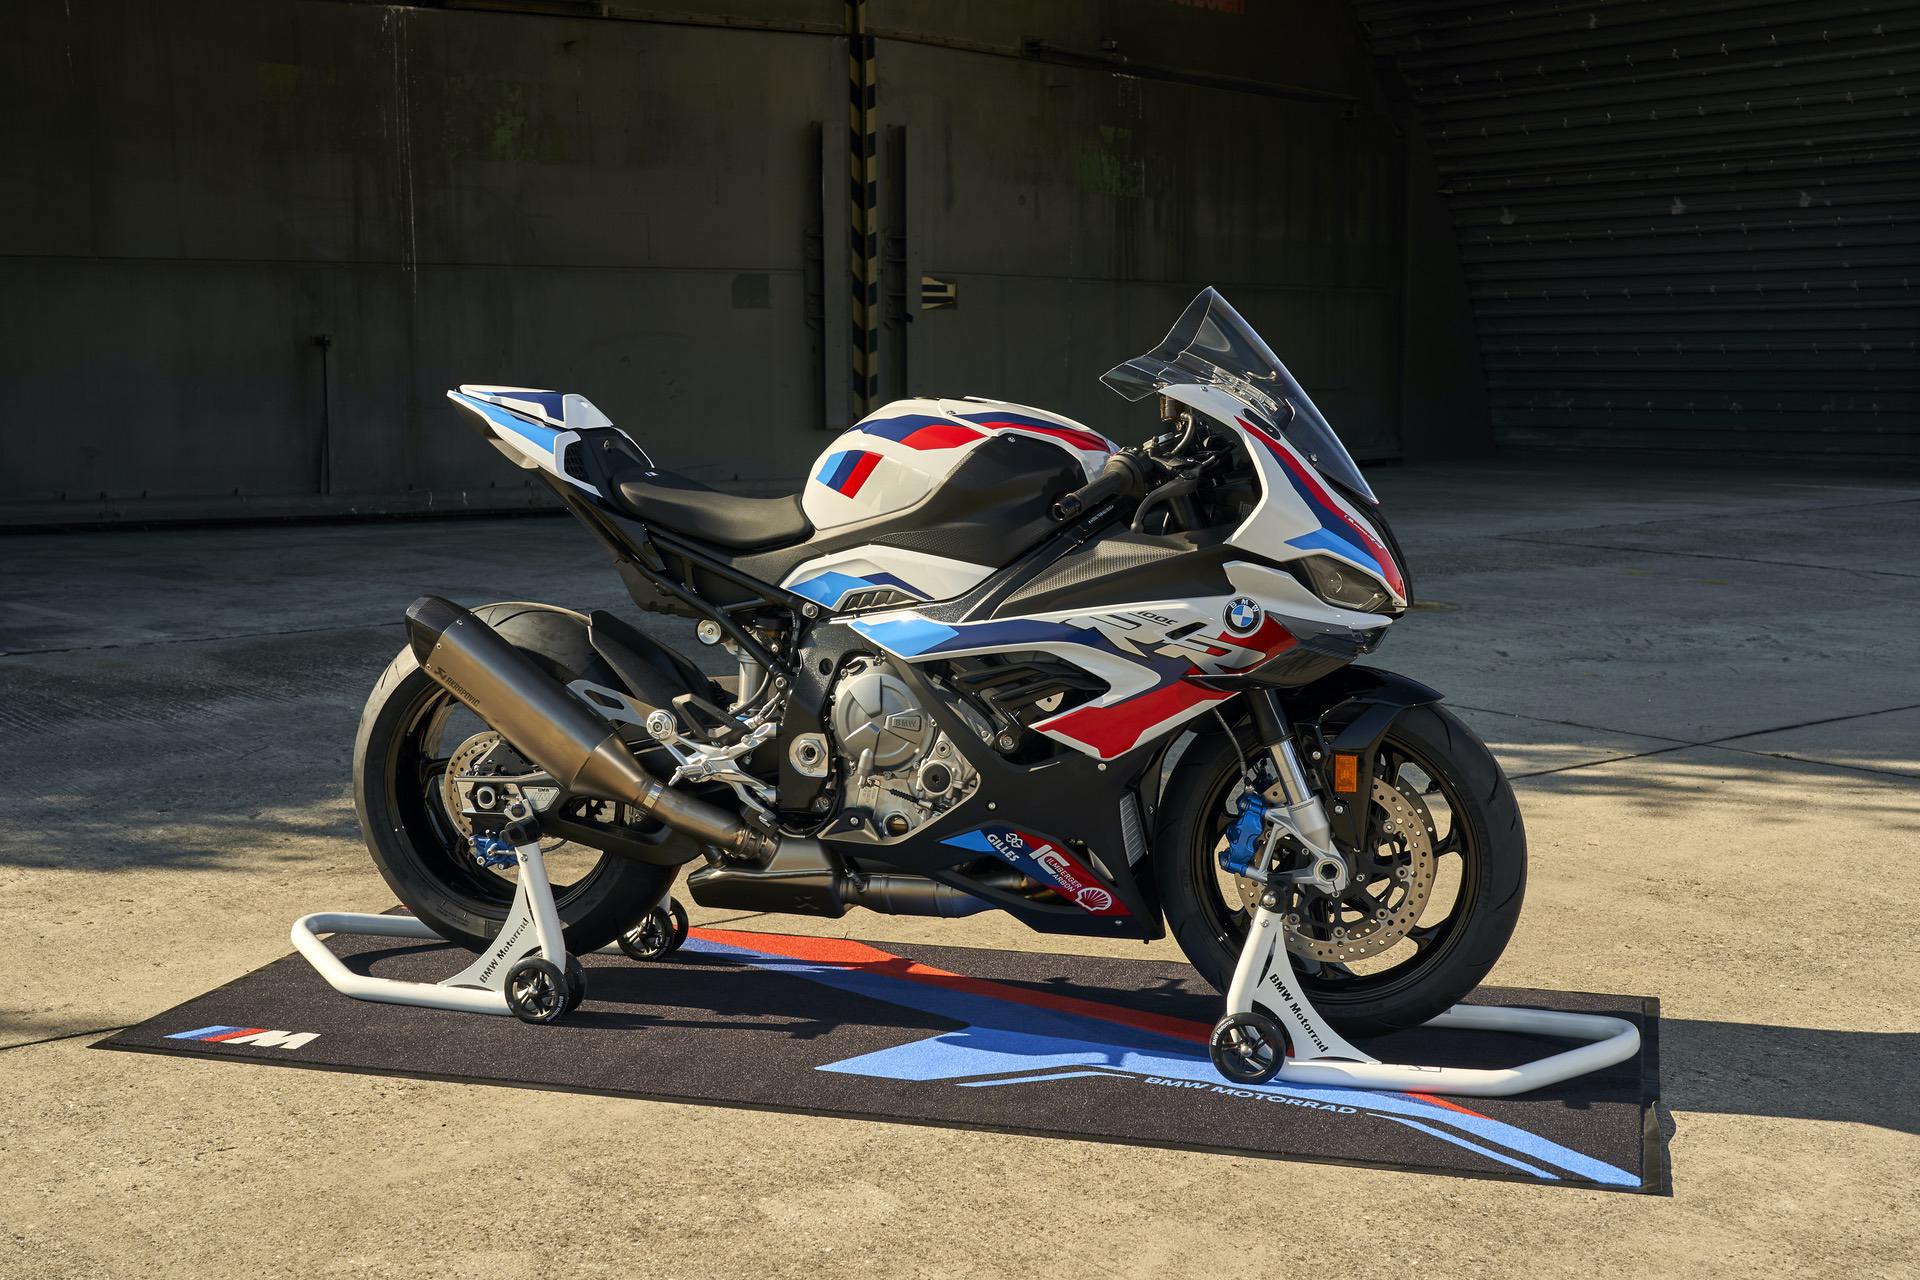 World Premiere: BMW M 1000 RR - The first M model from BMW Motorrad